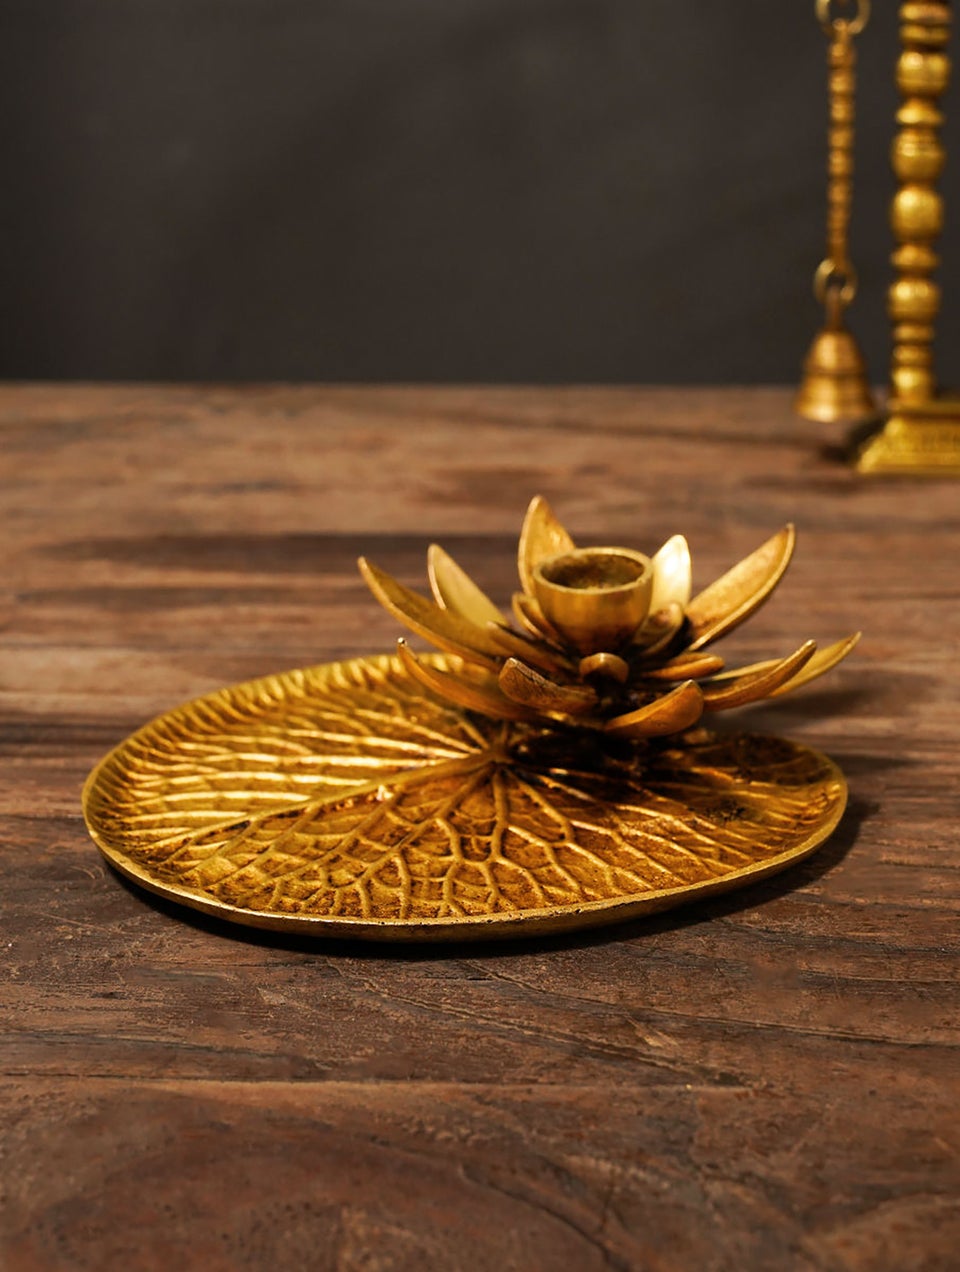 Home Decor Antique Gold Tabletop Accents